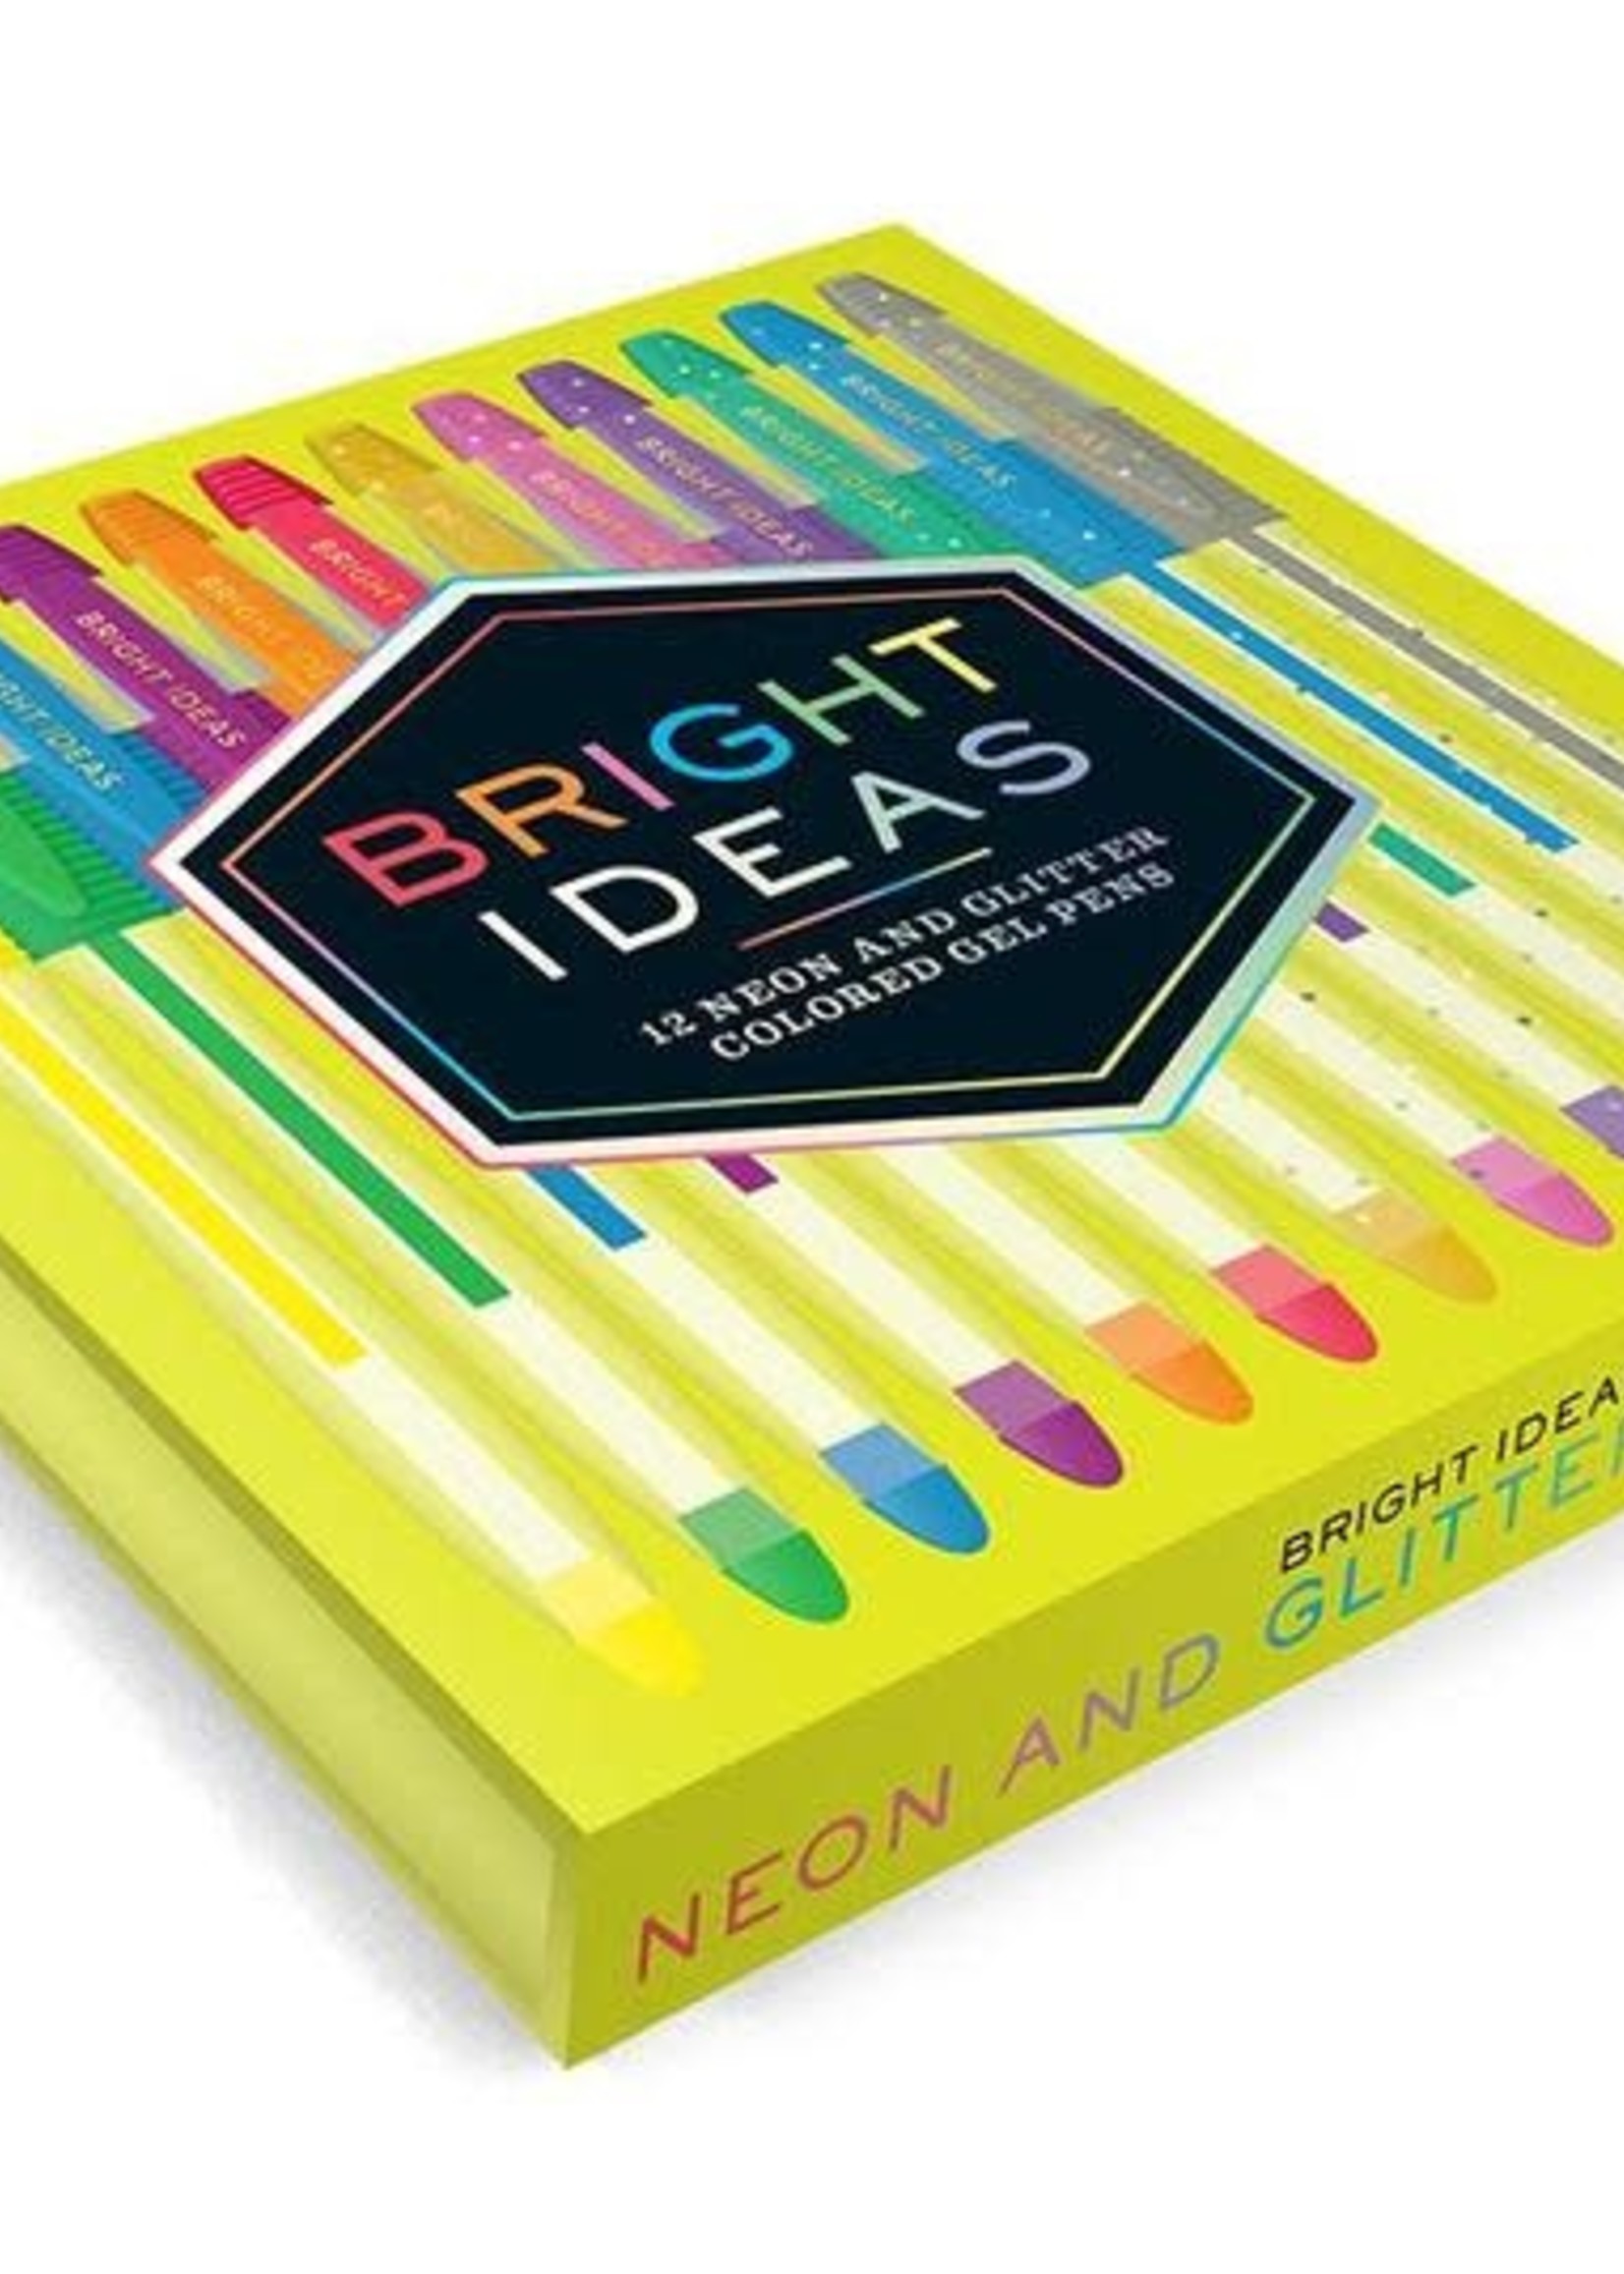 Bright Ideas Neon and Glitter Colored Gel Pens 12 Colored Pens by Chronicle Books